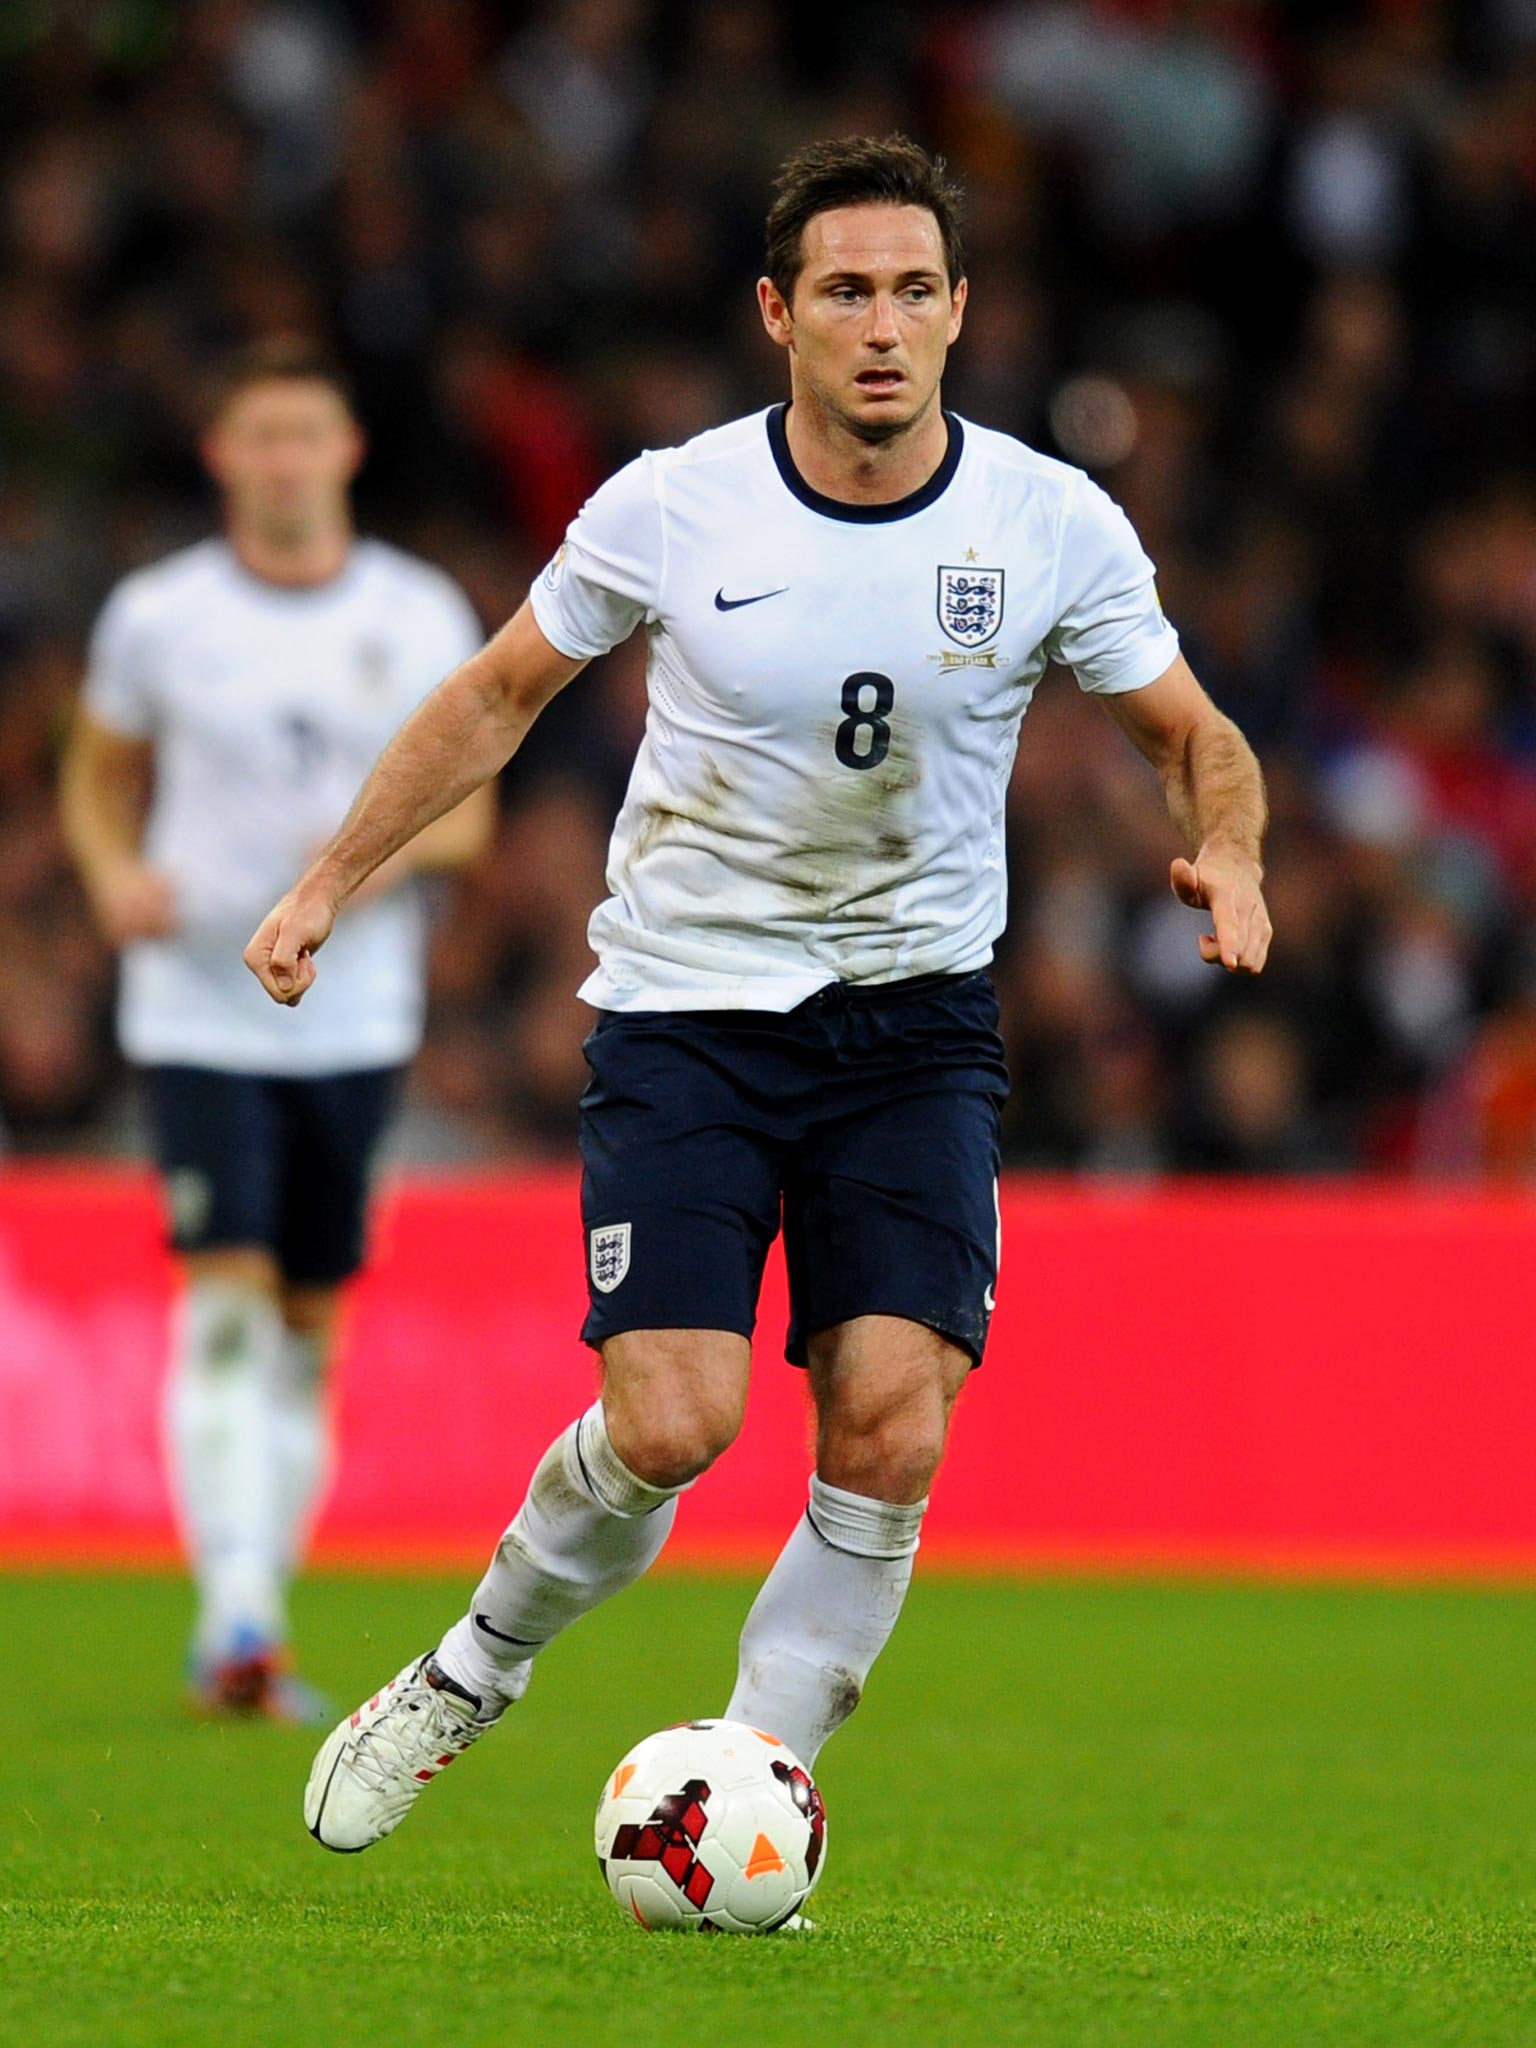 Chelsea’s Frank Lampard is not sure of his place in England’s World Cup squad